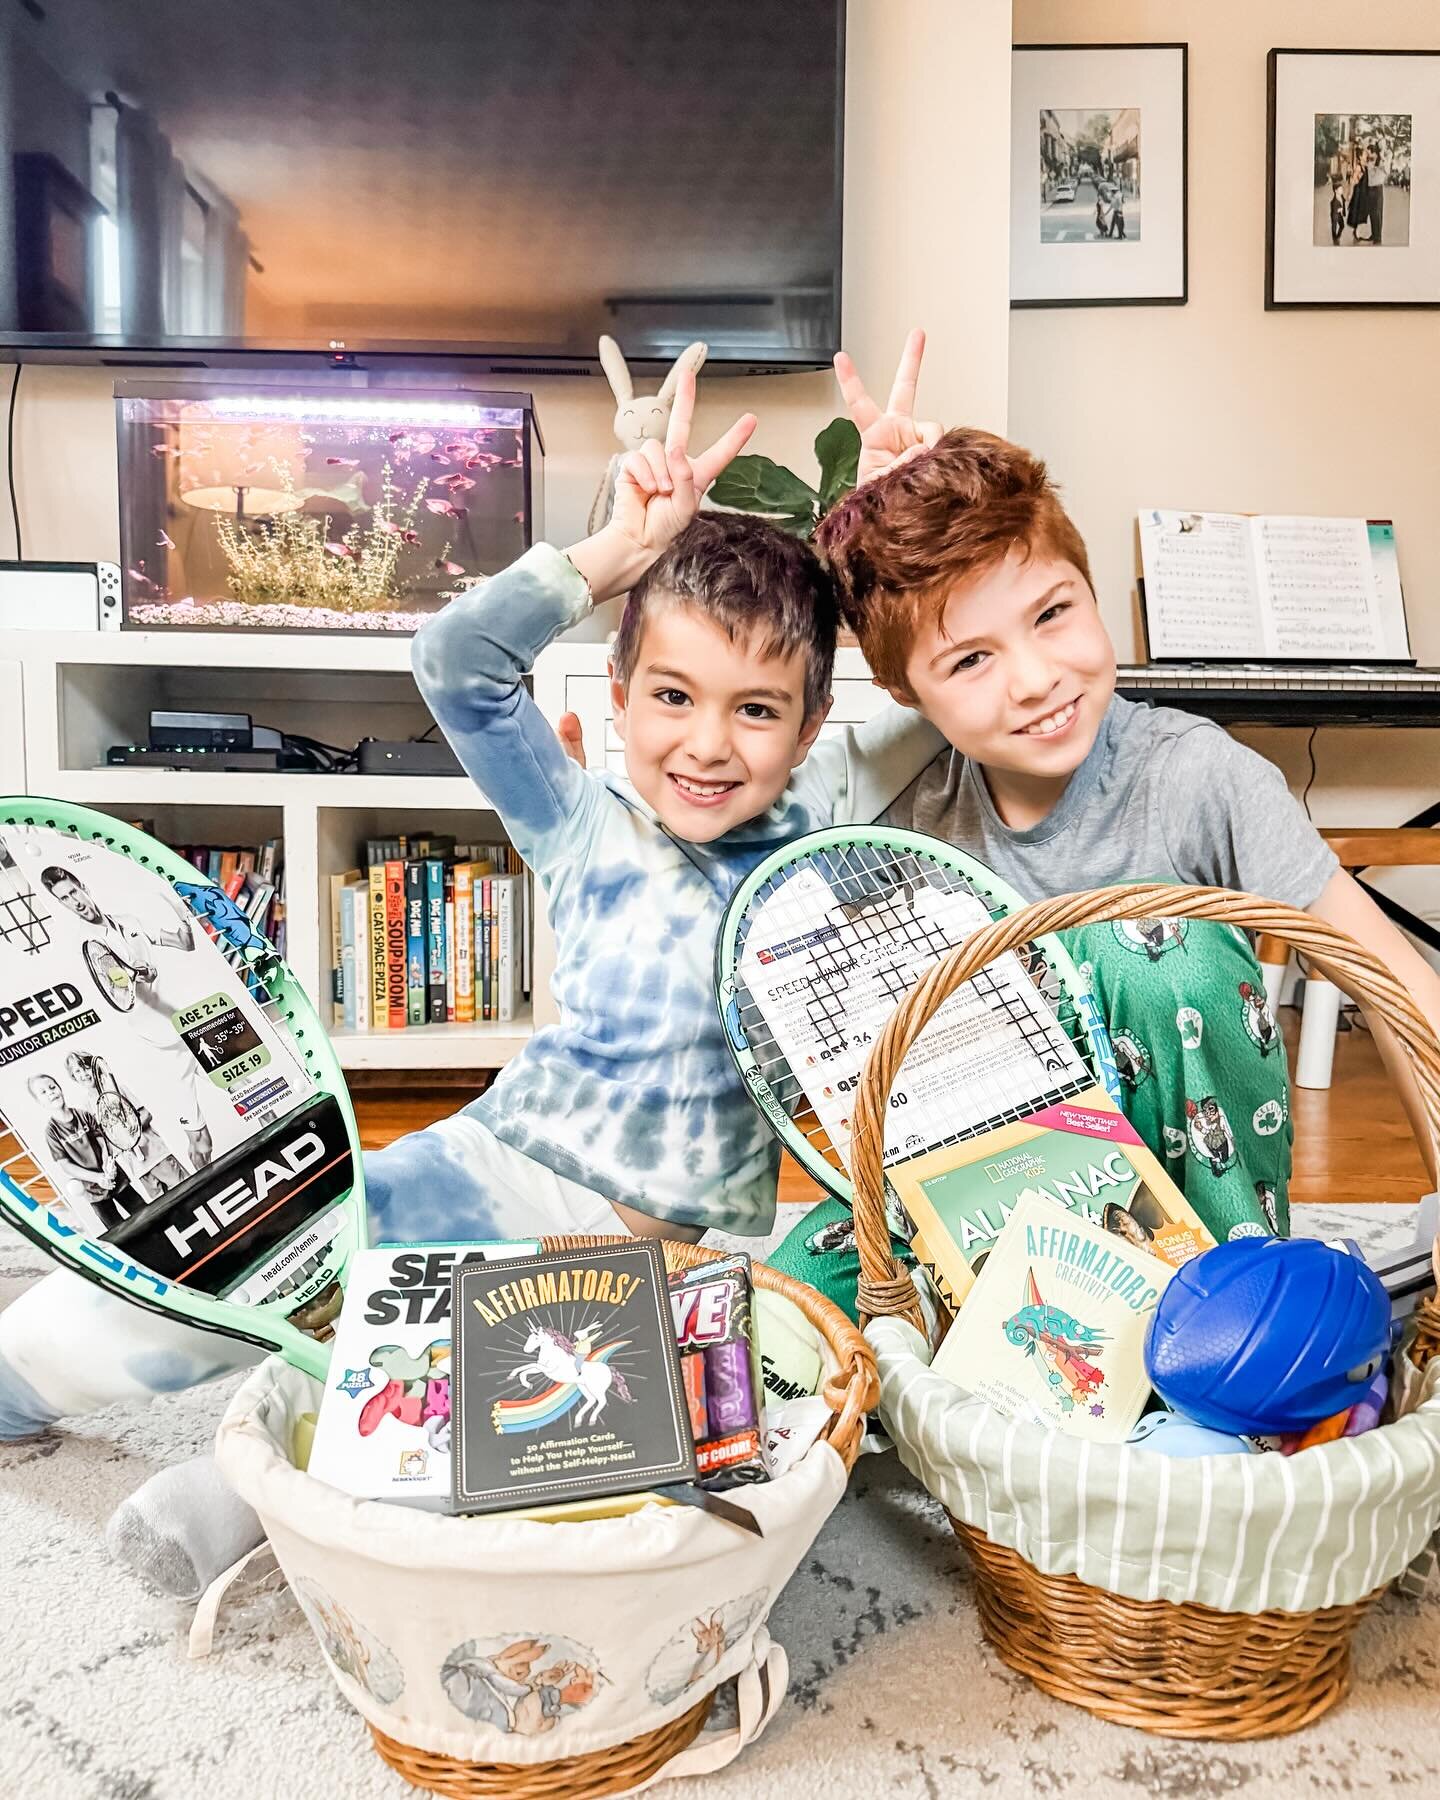 These little bunnies!! This year I was feeling all the feels as I kept thinking my boys were getting &ldquo;too big&rdquo; for certain holiday traditions. But as they leaped down the stairs with all the gusto of only those who believe, I found the ma